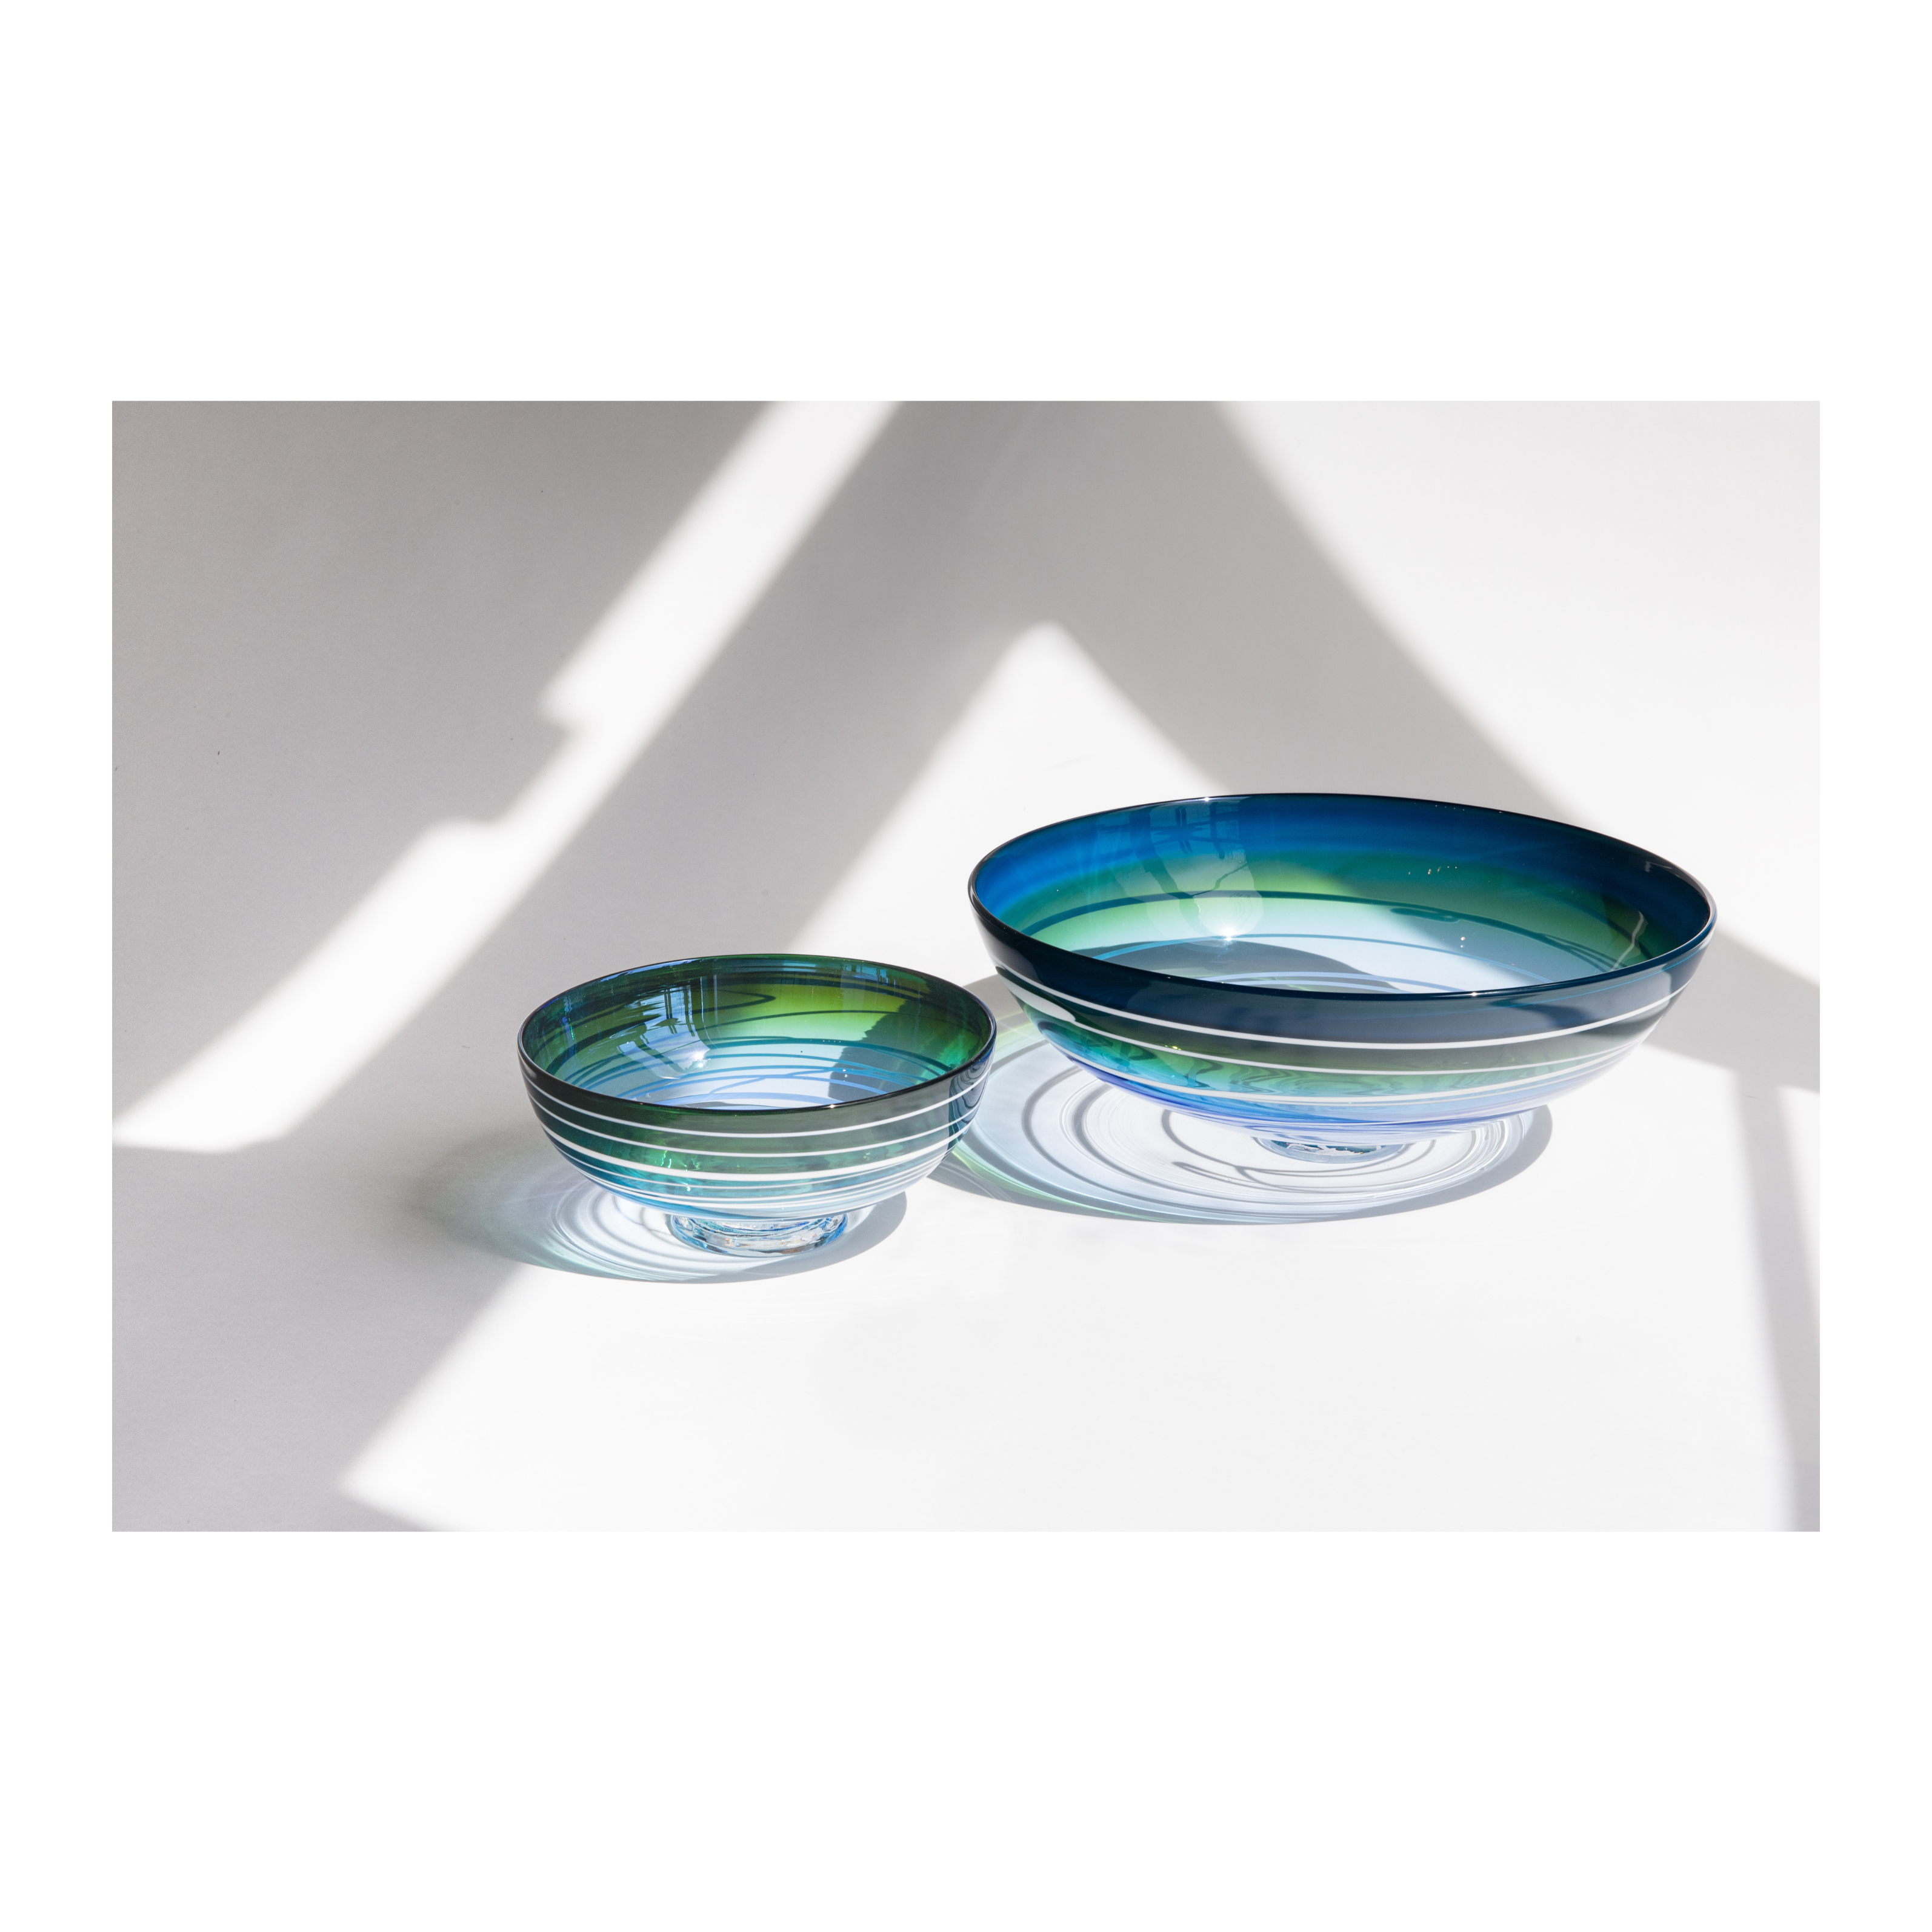 Red Handblown Glass Bowl and Nesting Bowls